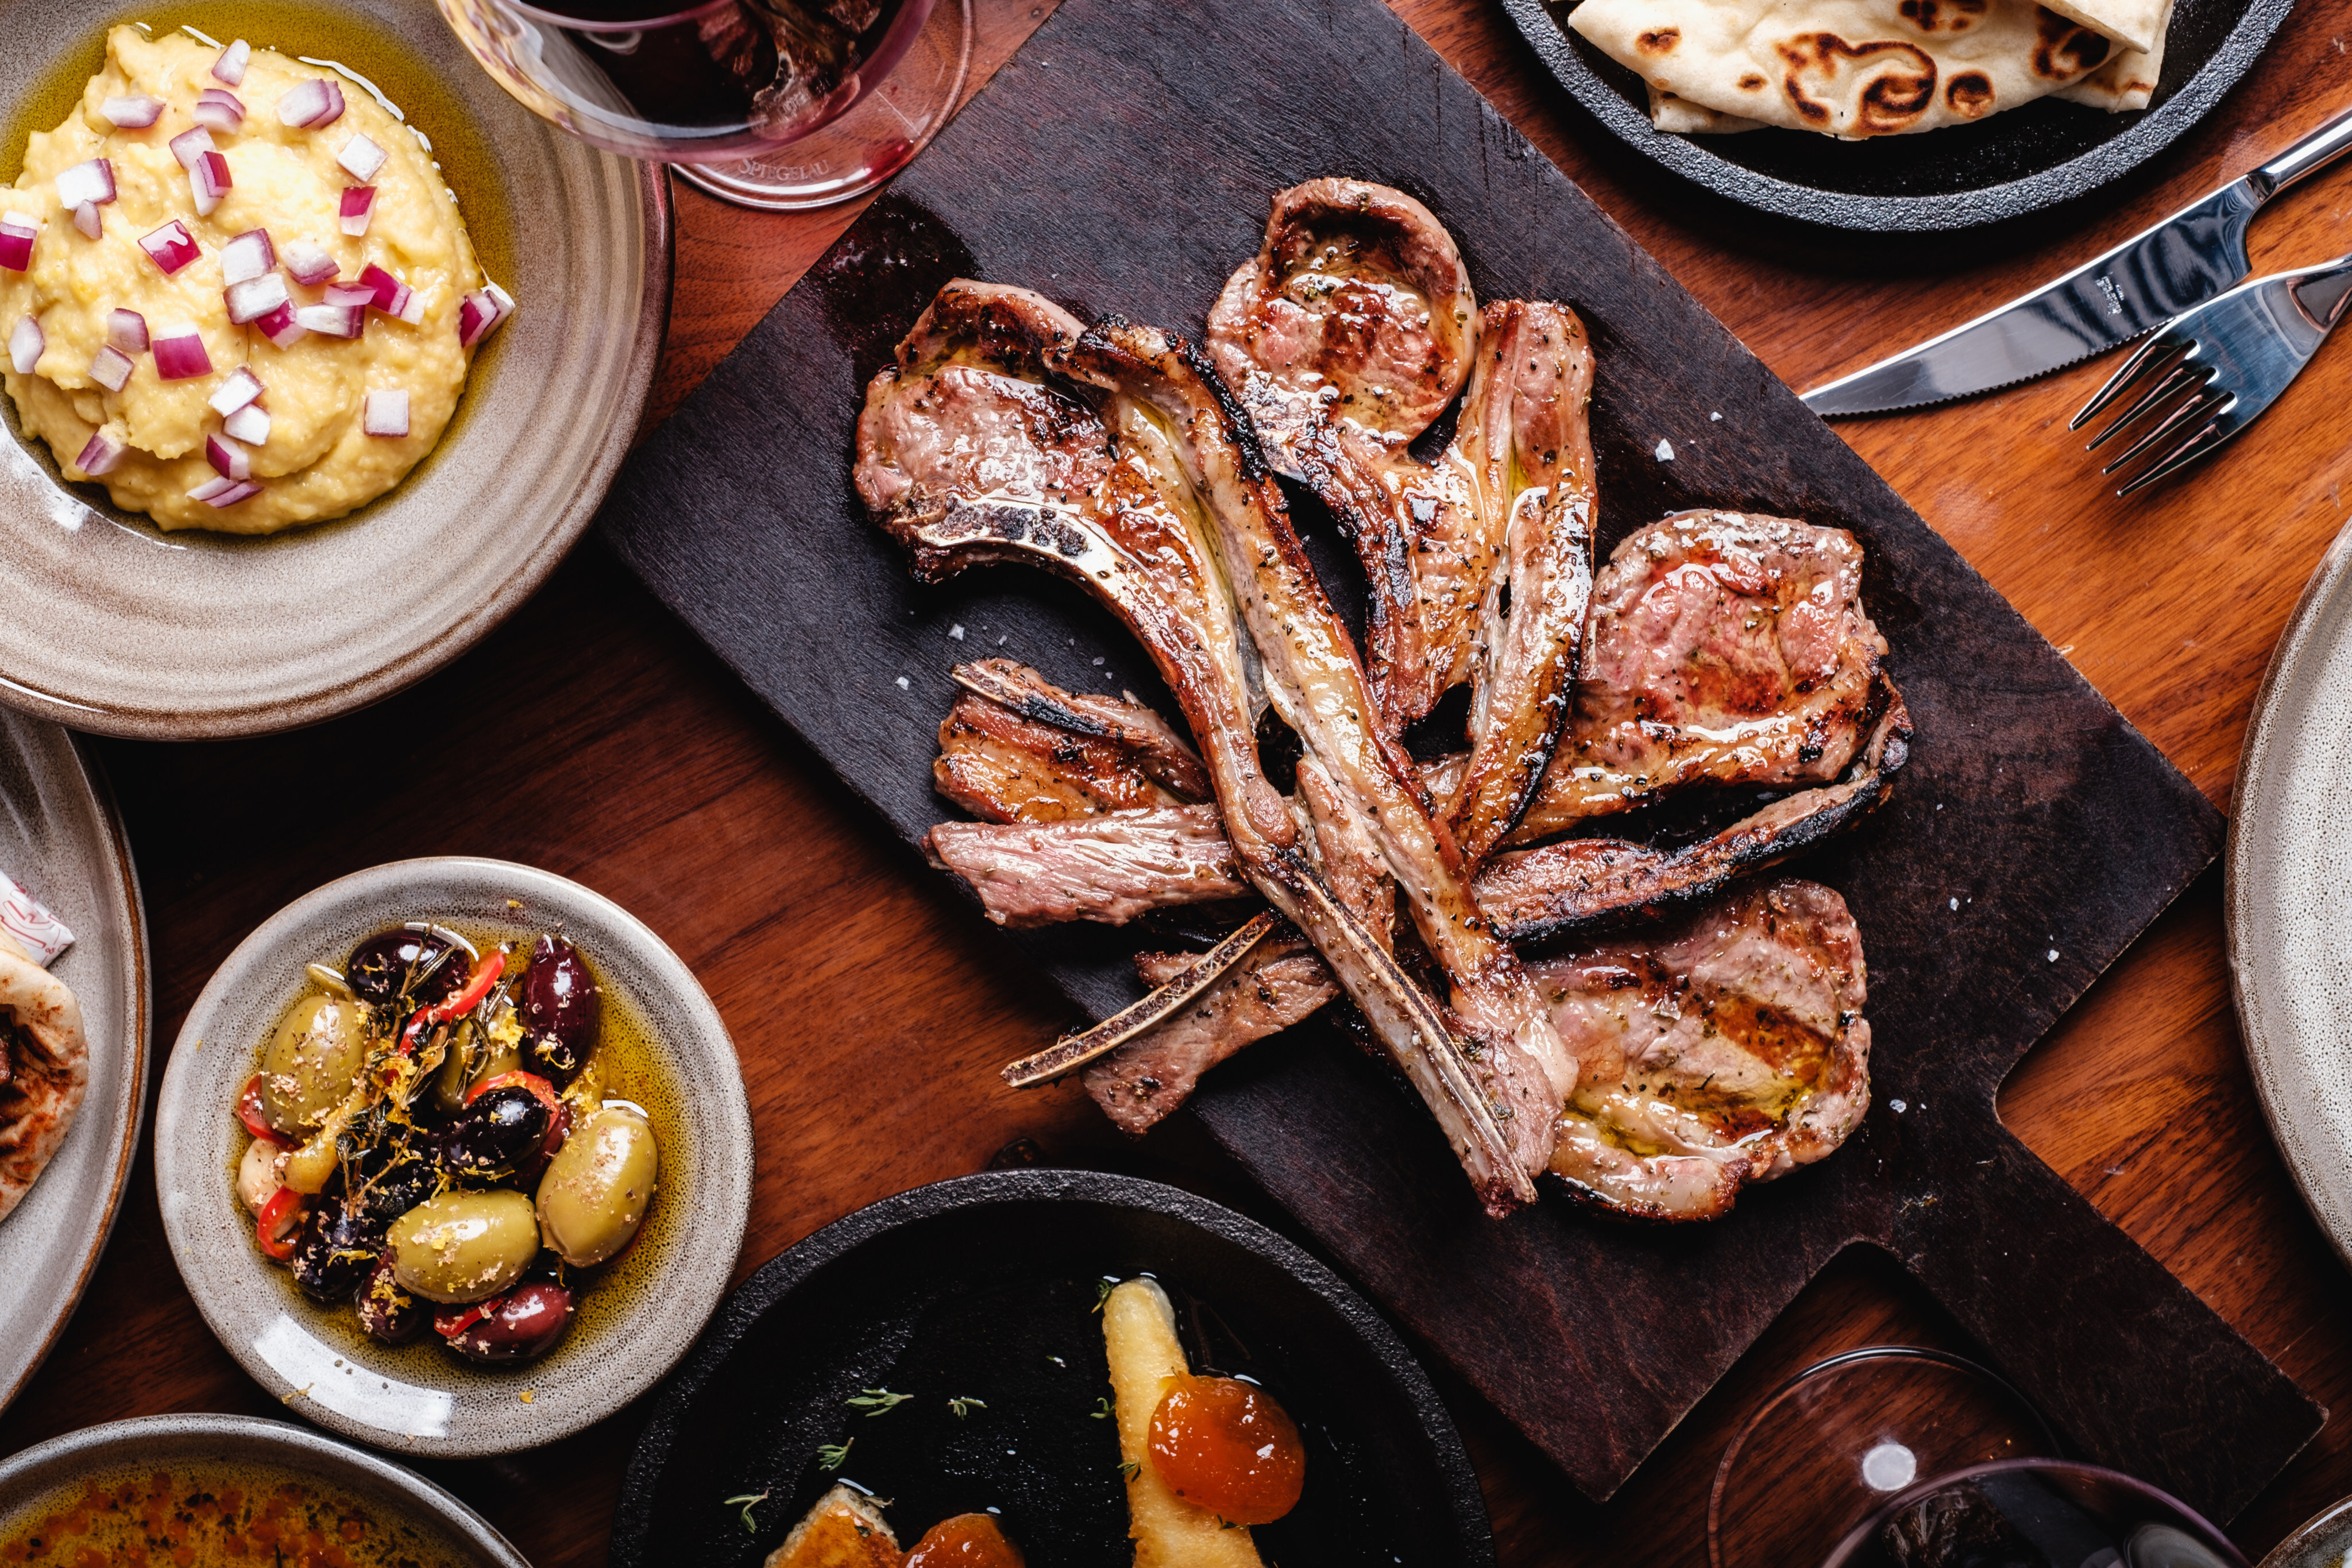 Artemis & Apollo’s lamb chops are the epitome of the simple Greek cooking the restaurant wants to exemplify. Photo: Artemis & Apollo